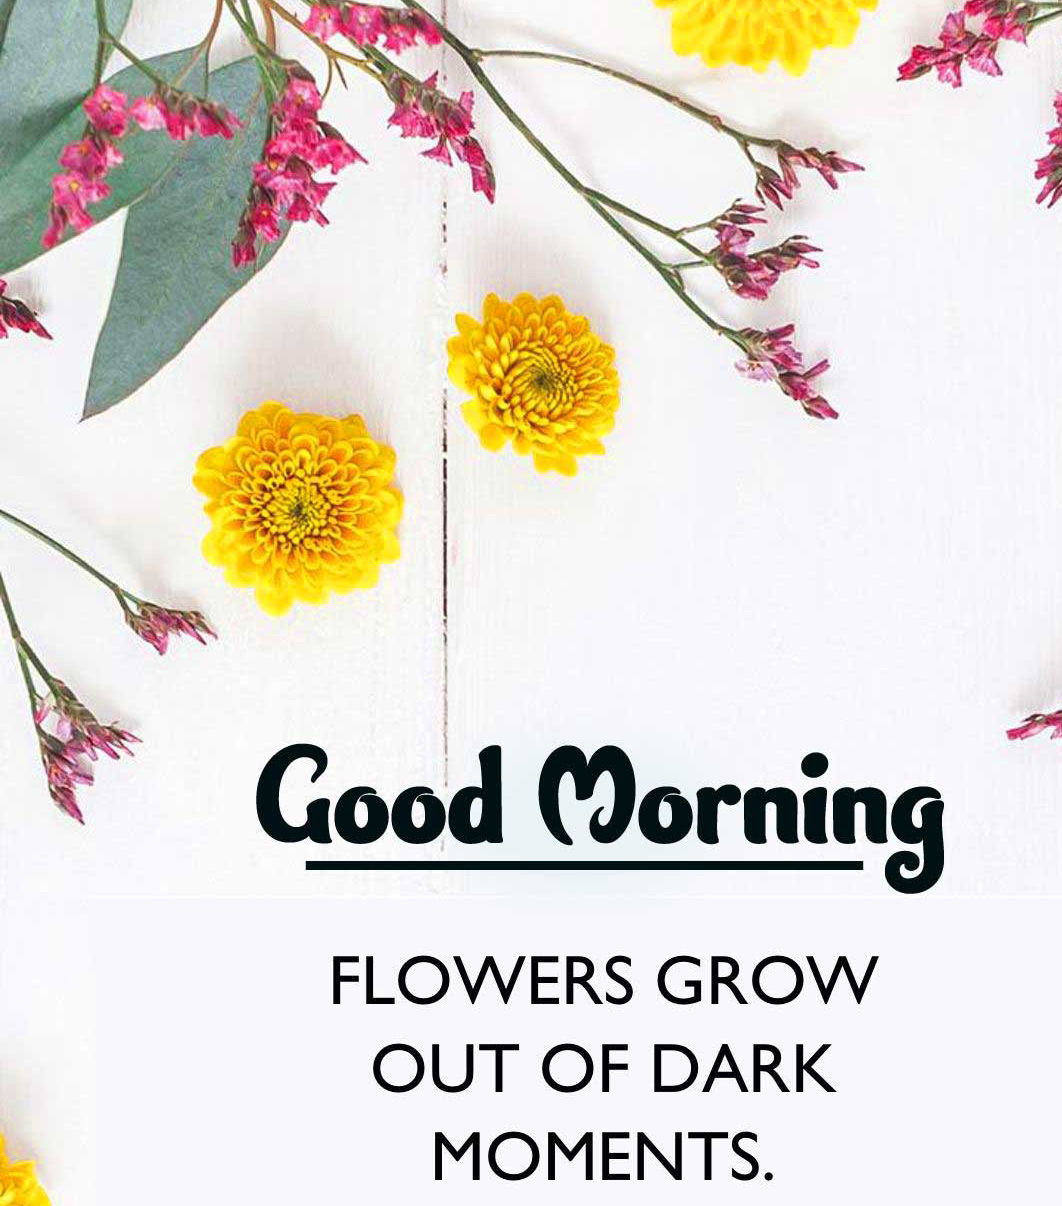 Good Morning Wishes Images with positive thoughts Wallpaper Free Download 